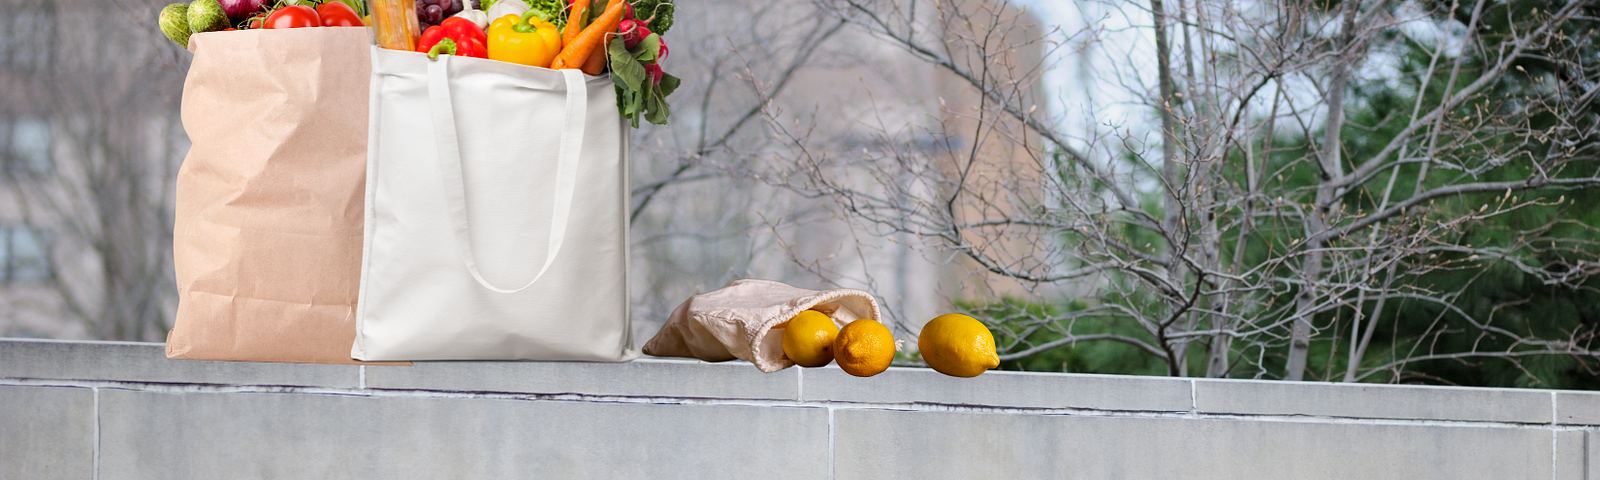 A cloth tote bag and a paper grocery bag filled with an assortment of fresh vegetables and fruits, placed on a stone ledge with the word “UNIVERSITY” engraved on it. There are also some loose oranges next to the bags. The background features bare tree branches and a hint of buildings, suggesting an academic setting.